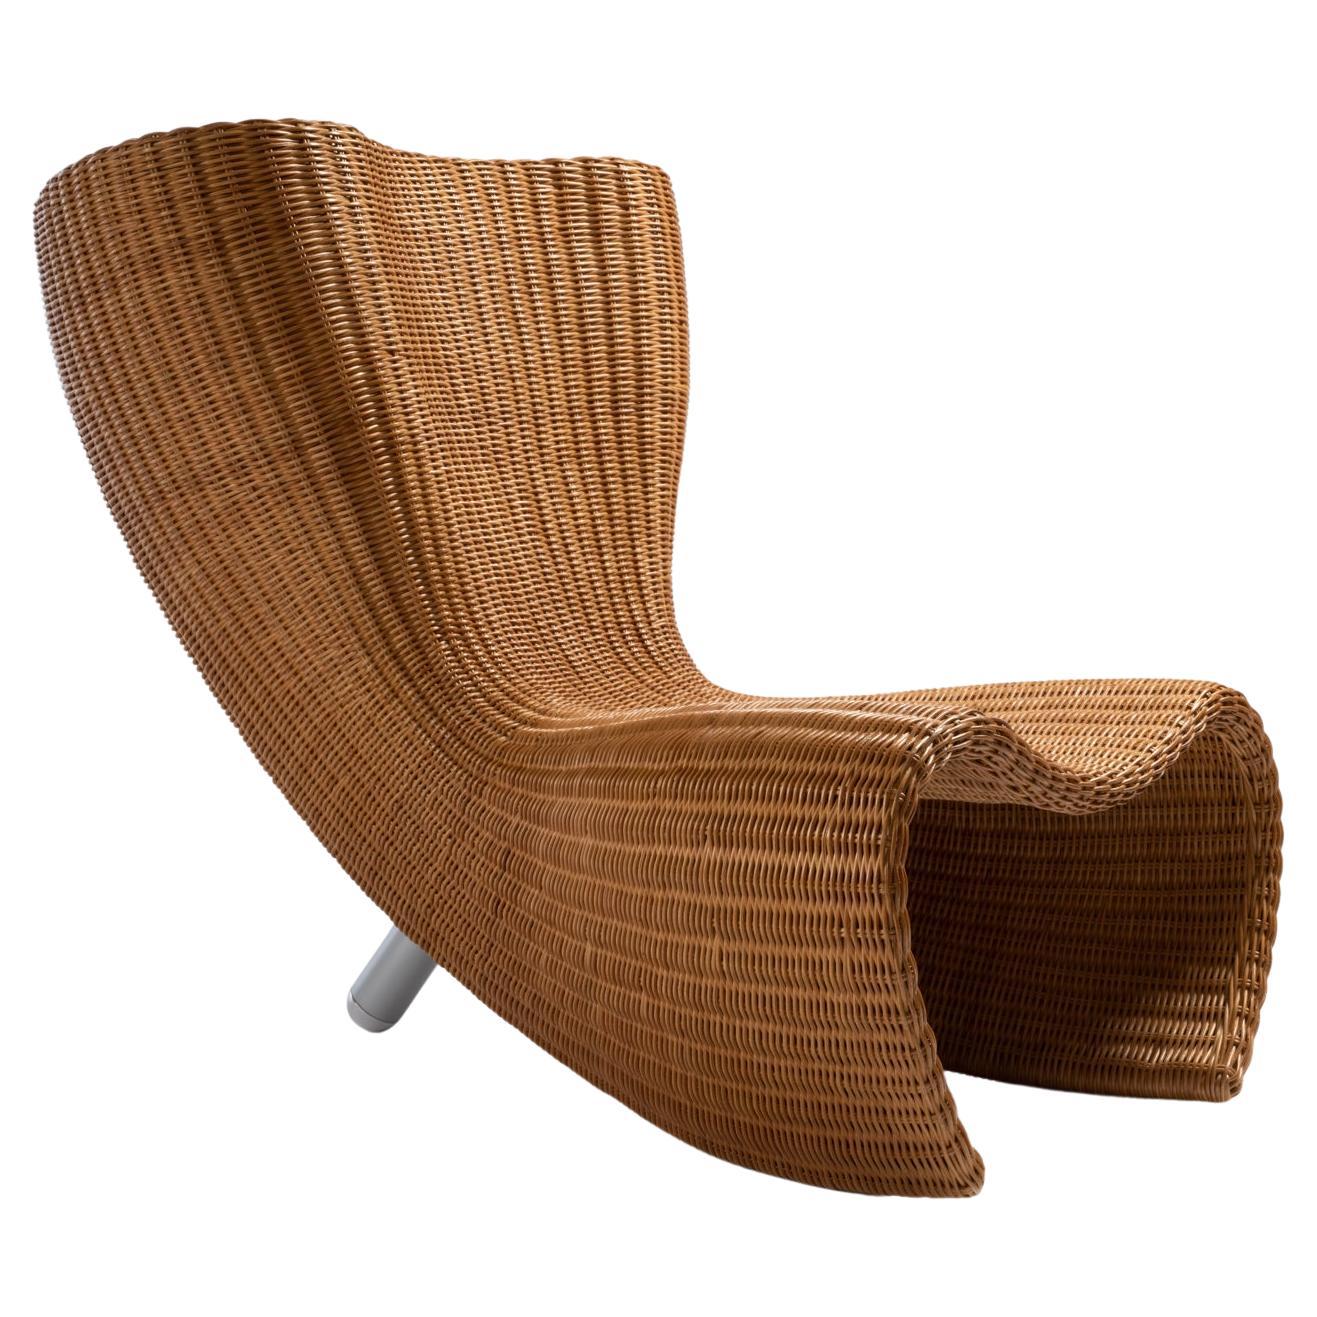 Wicker Chair by Marc Newson